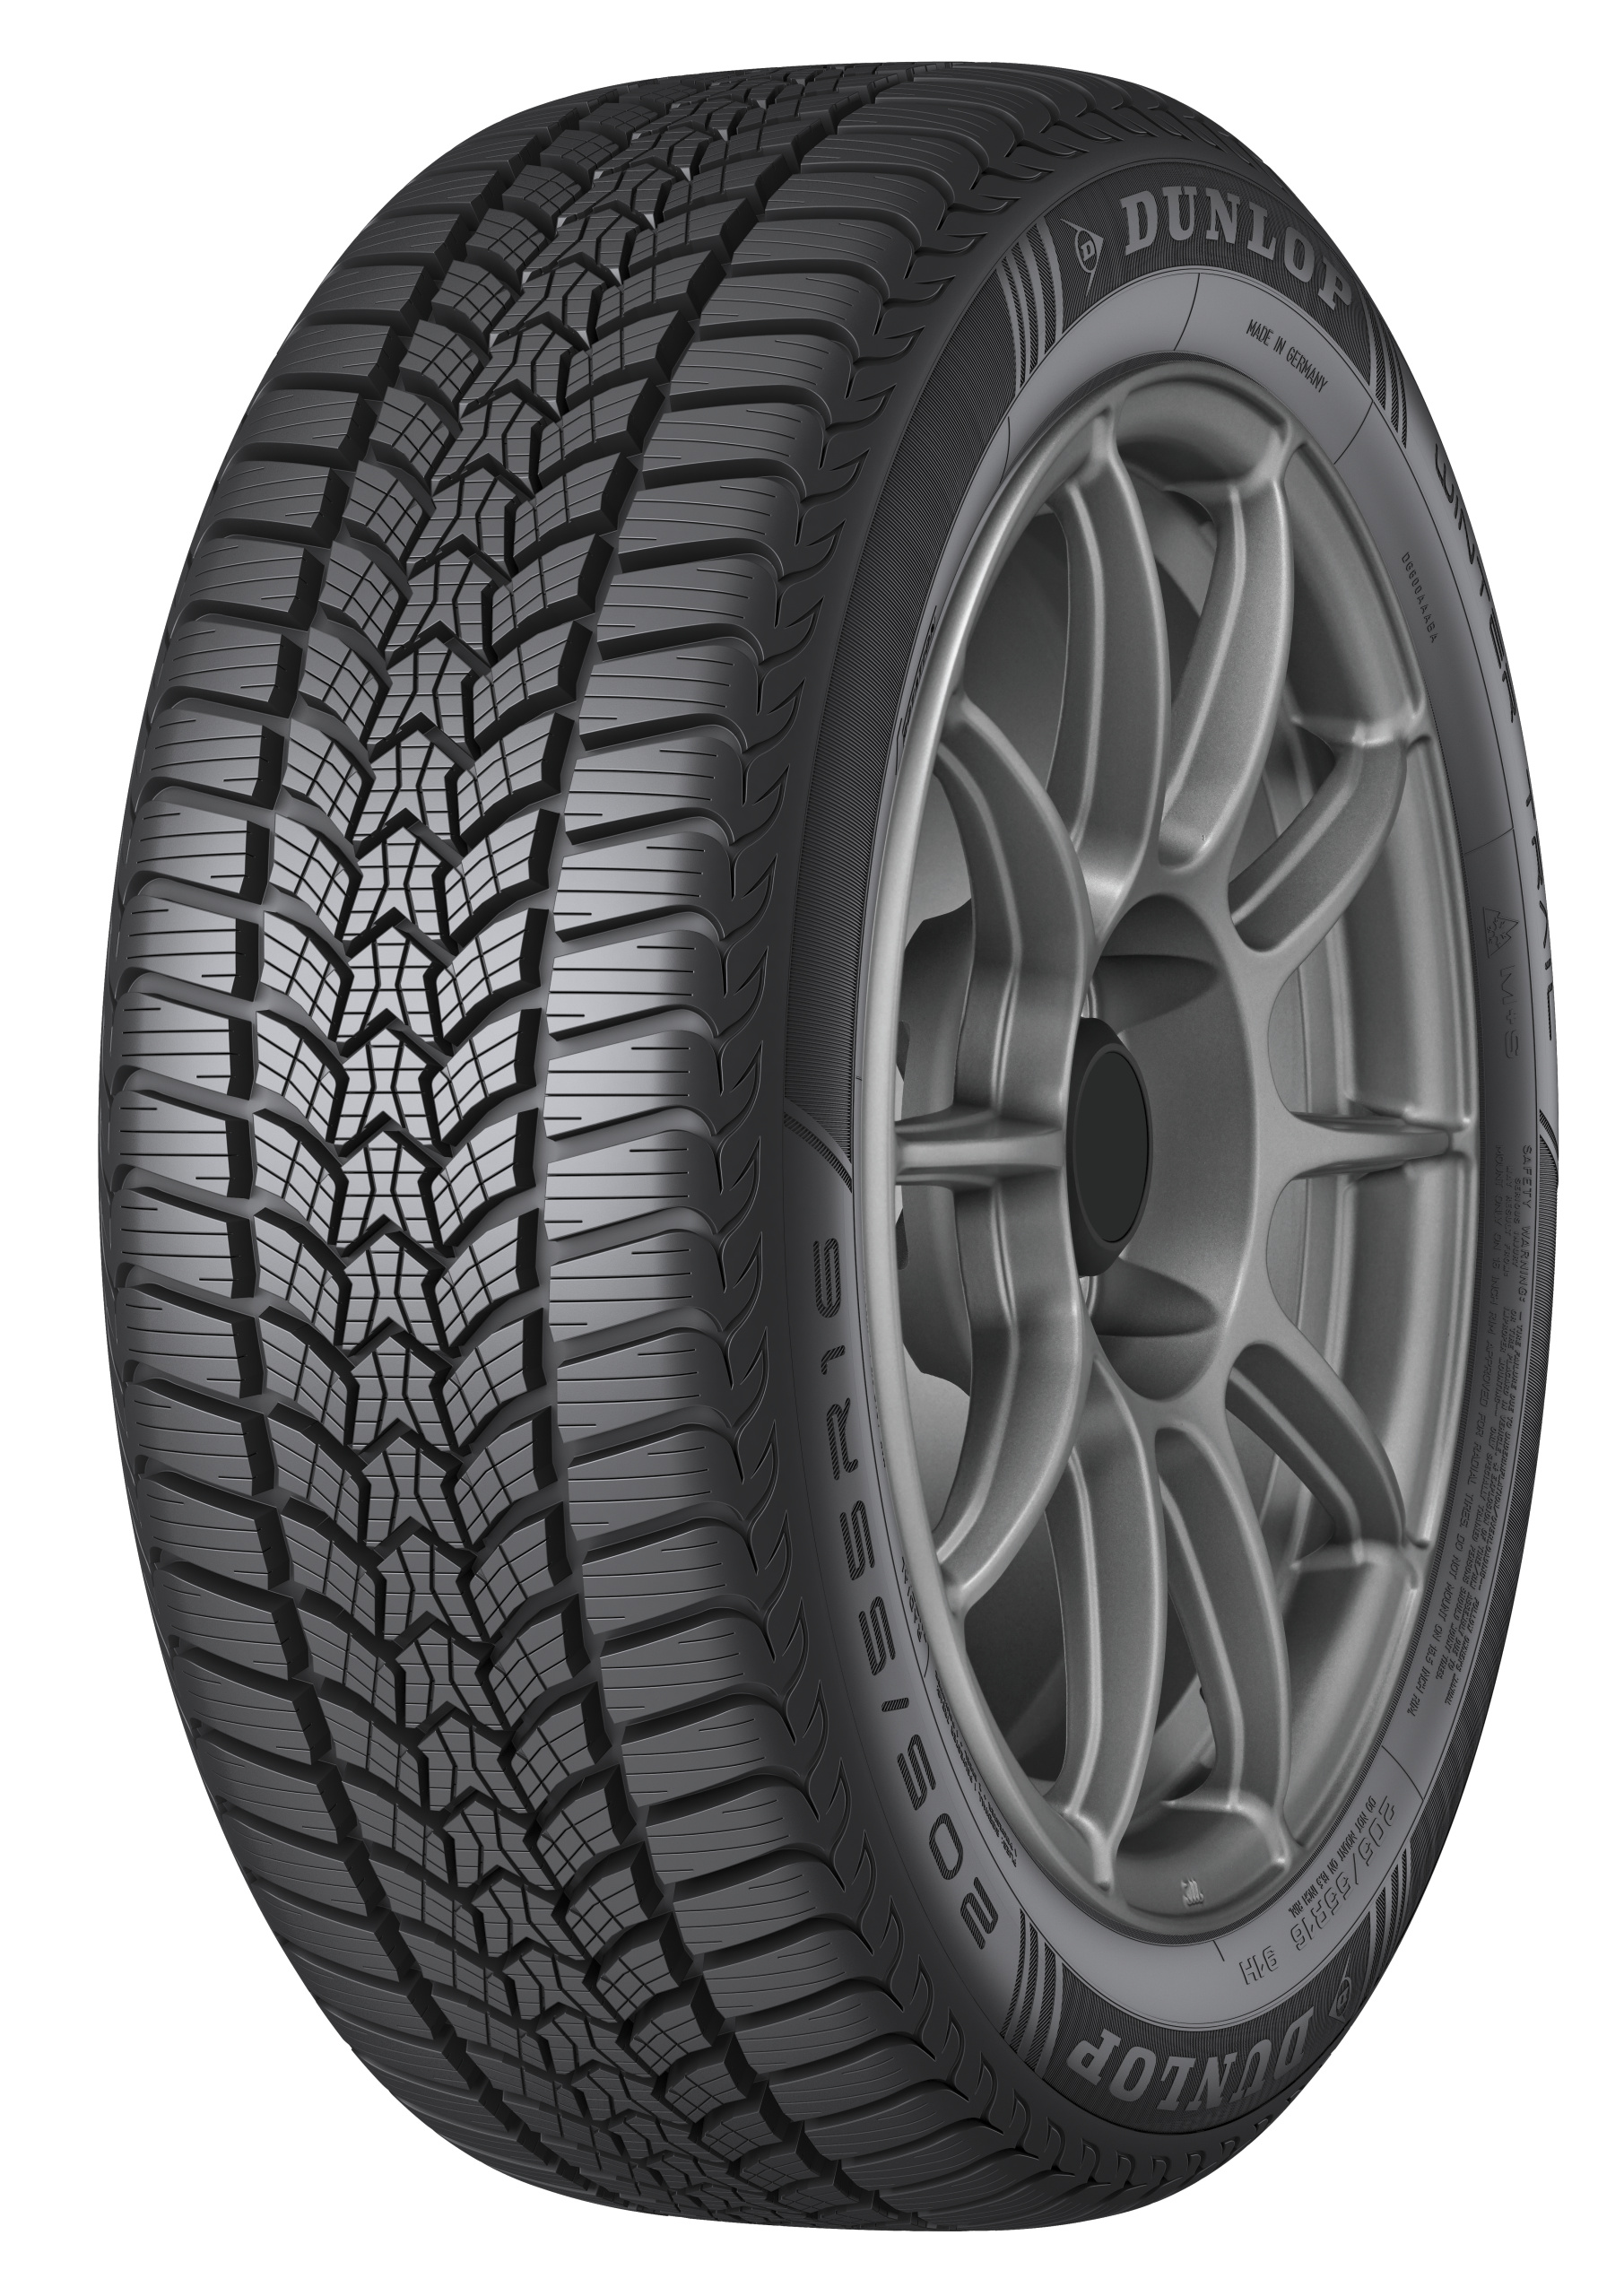 Gomme Nuove Dunlop 175/65 R14 82T WINTER TRAIL M+S pneumatici nuovi Invernale